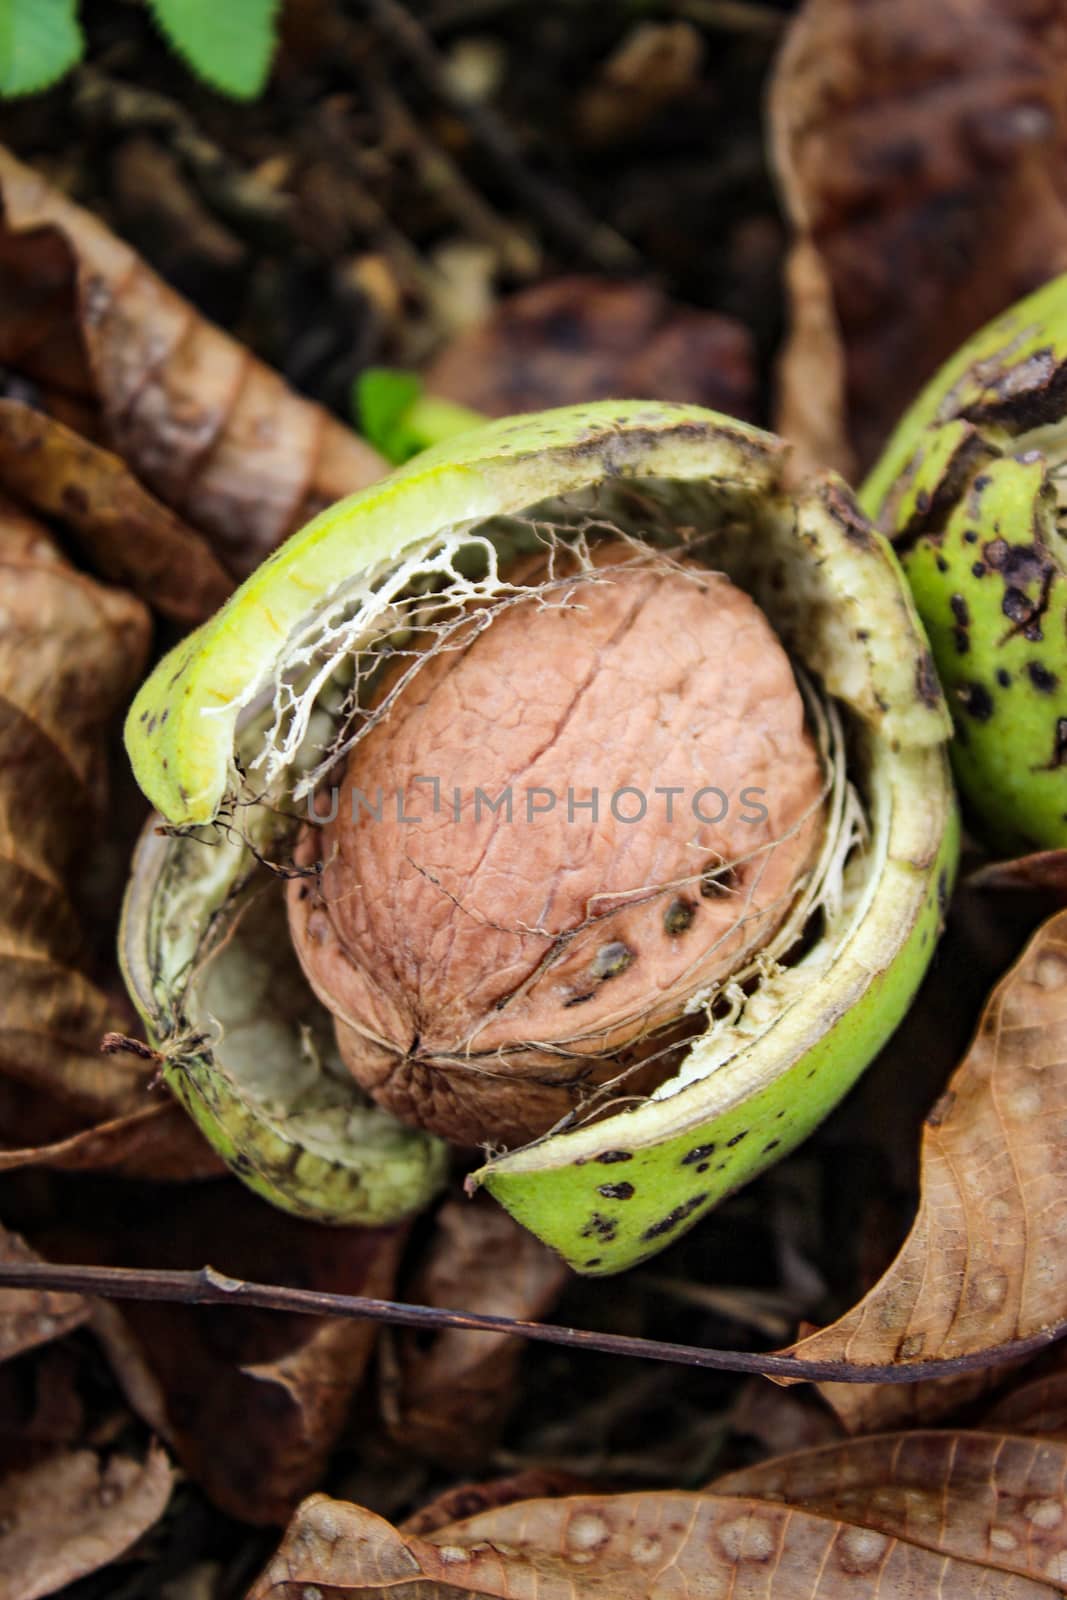 A ripe walnut inside the green shell fell to the floor among the dried leaves. by mahirrov